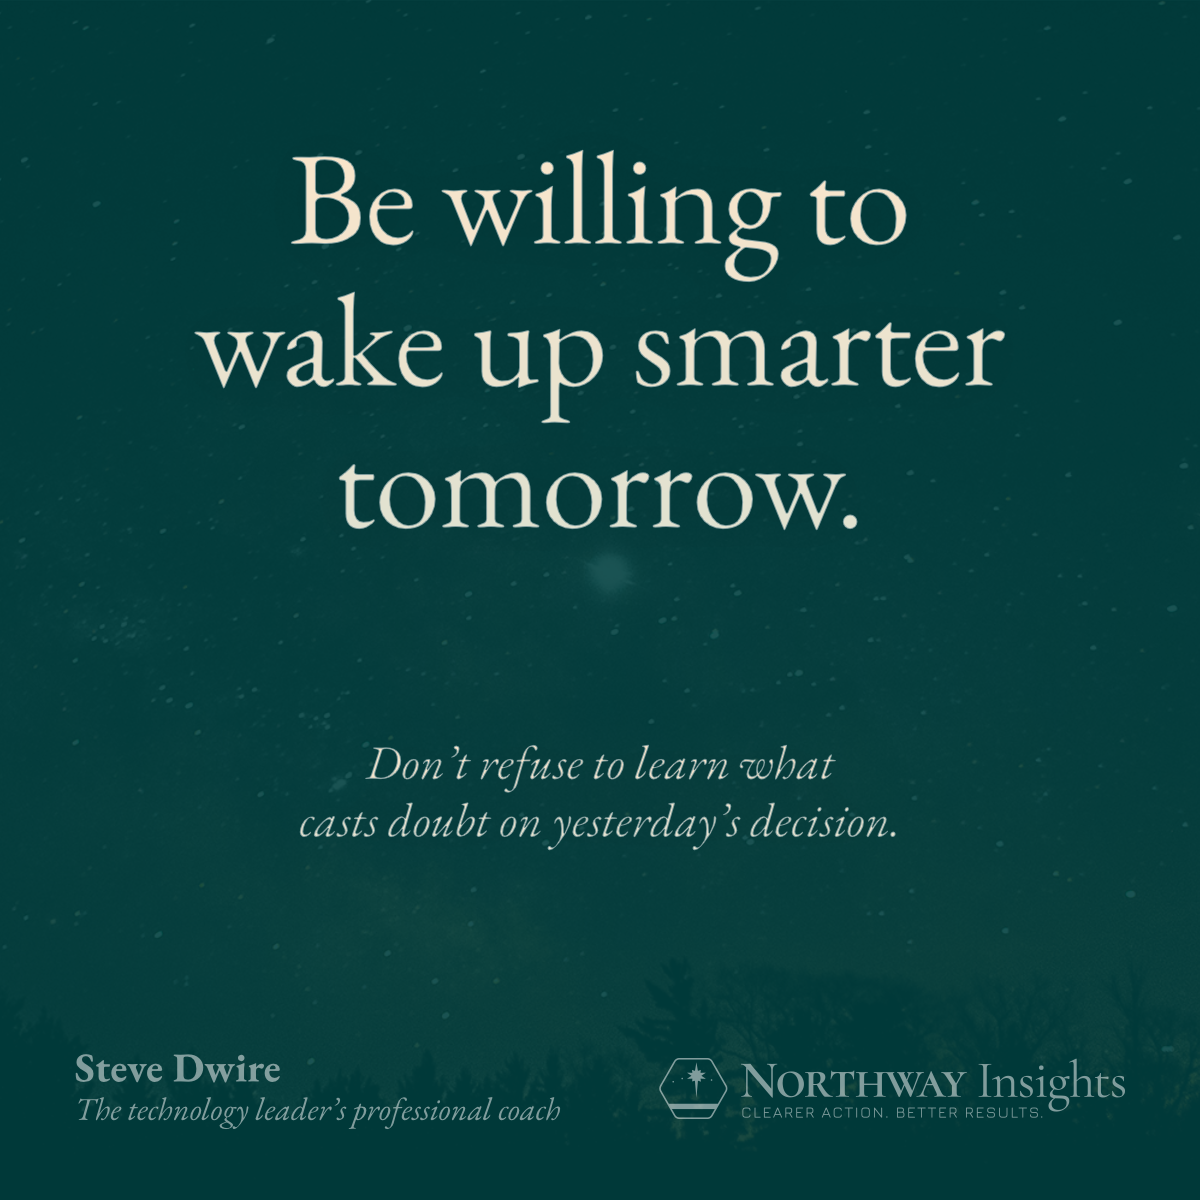 Be willing to wake up smarter tomorrow. Don't resist learning what casts doubt on a previous decision.